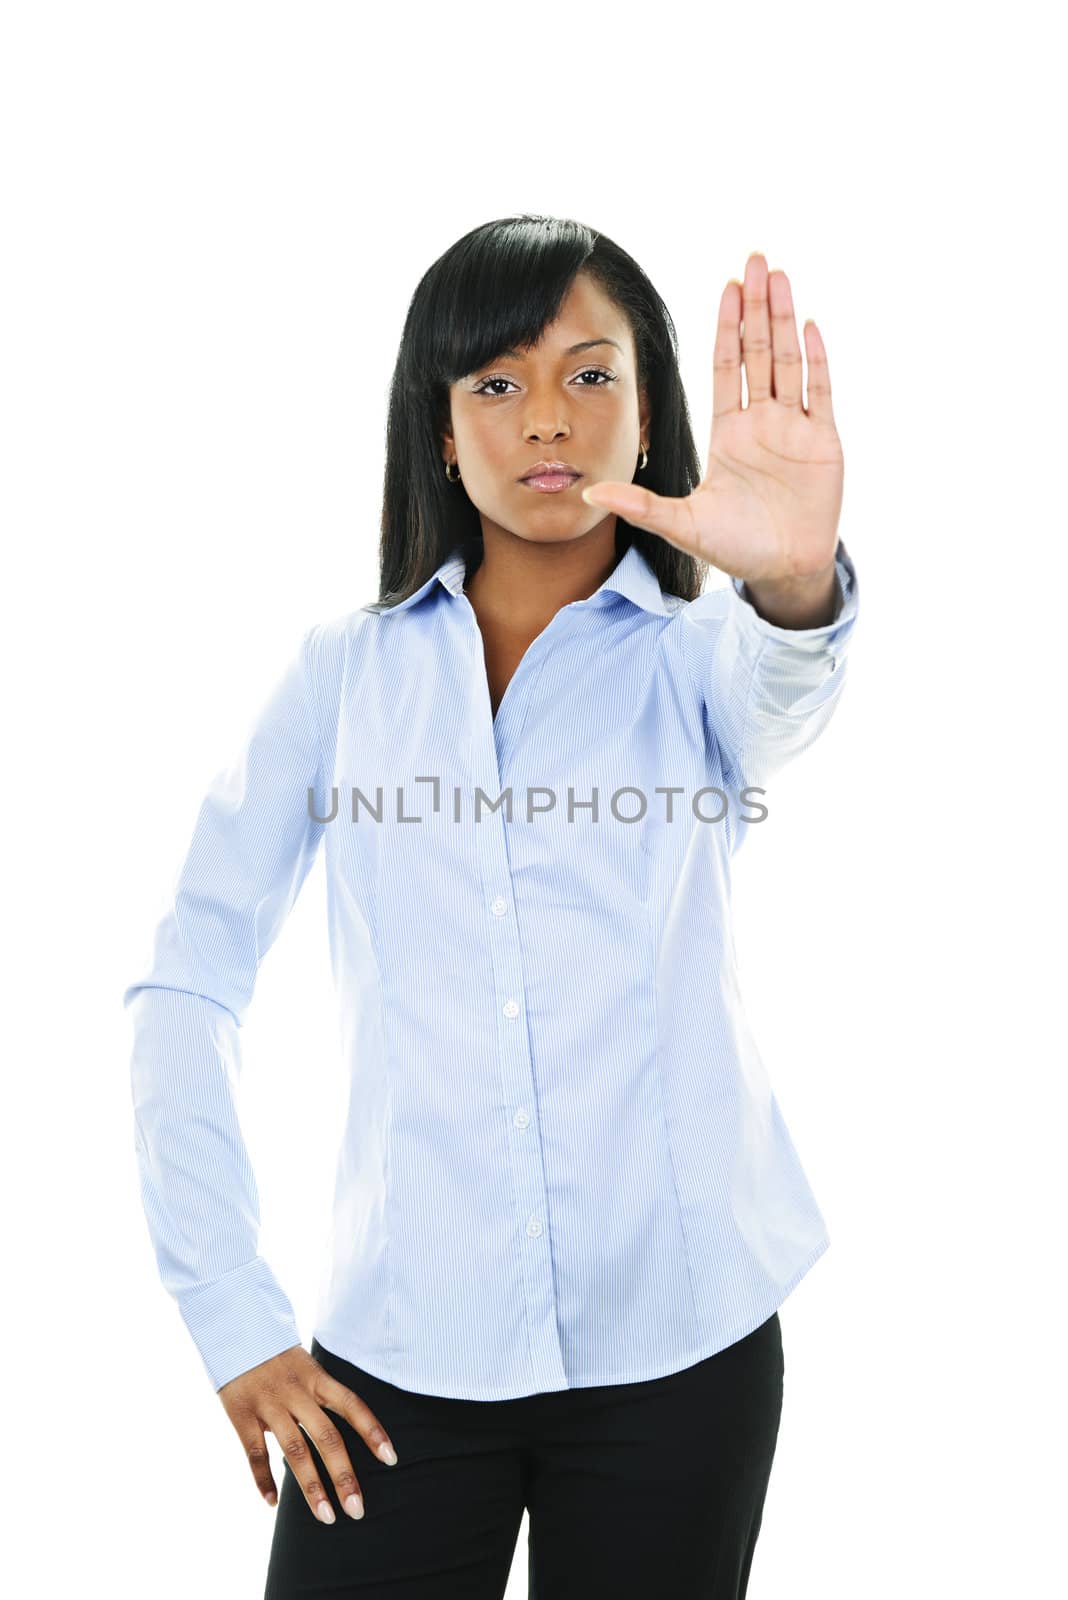 Serious young woman giving stop gesture by elenathewise